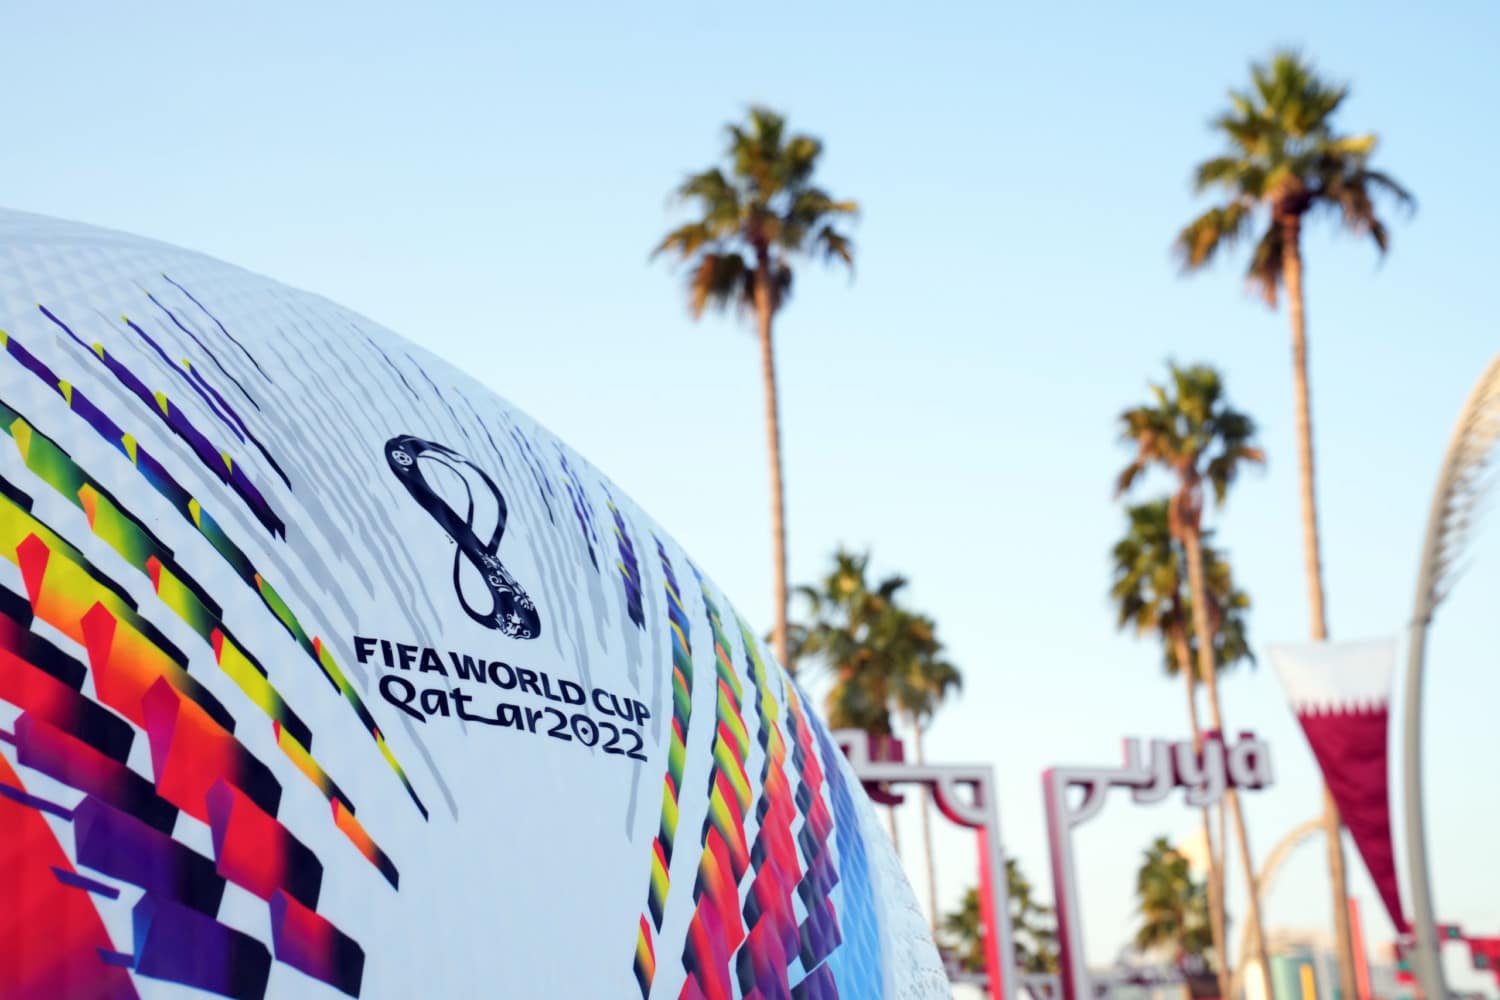 Qatar World Cup official match ball in front of palm trees 